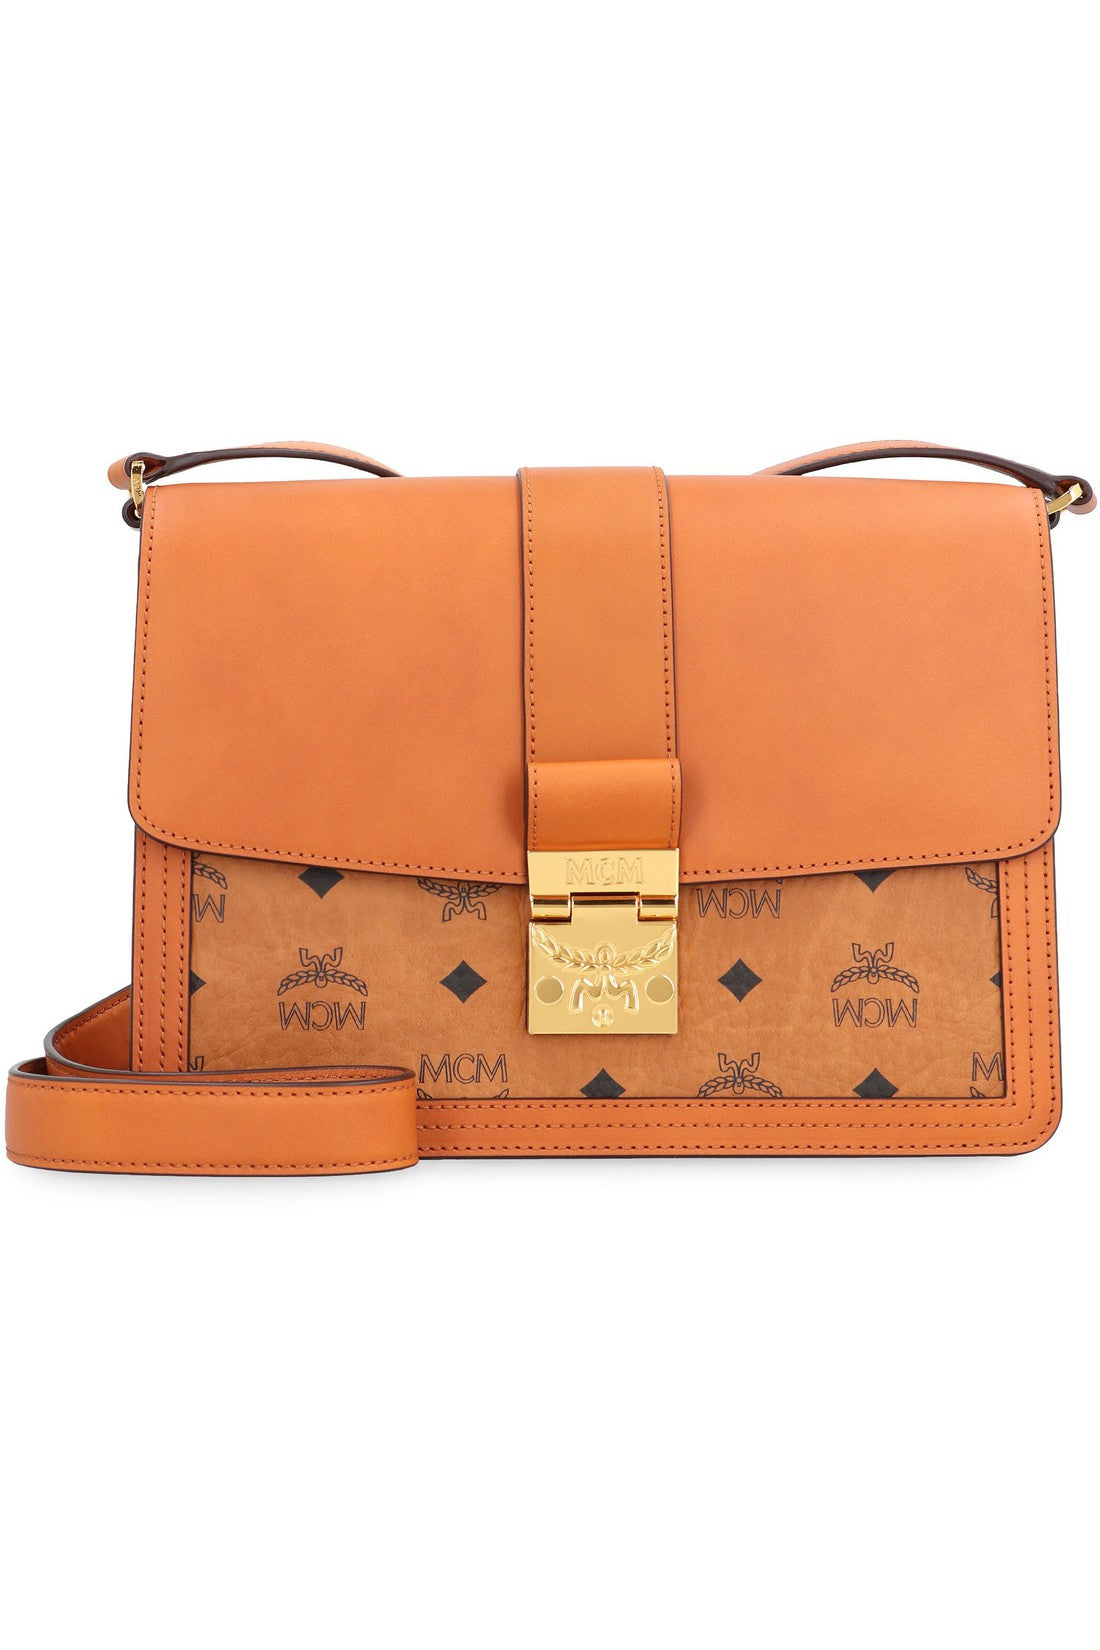 MCM-OUTLET-SALE-Tracy leather crossbody bag-ARCHIVIST